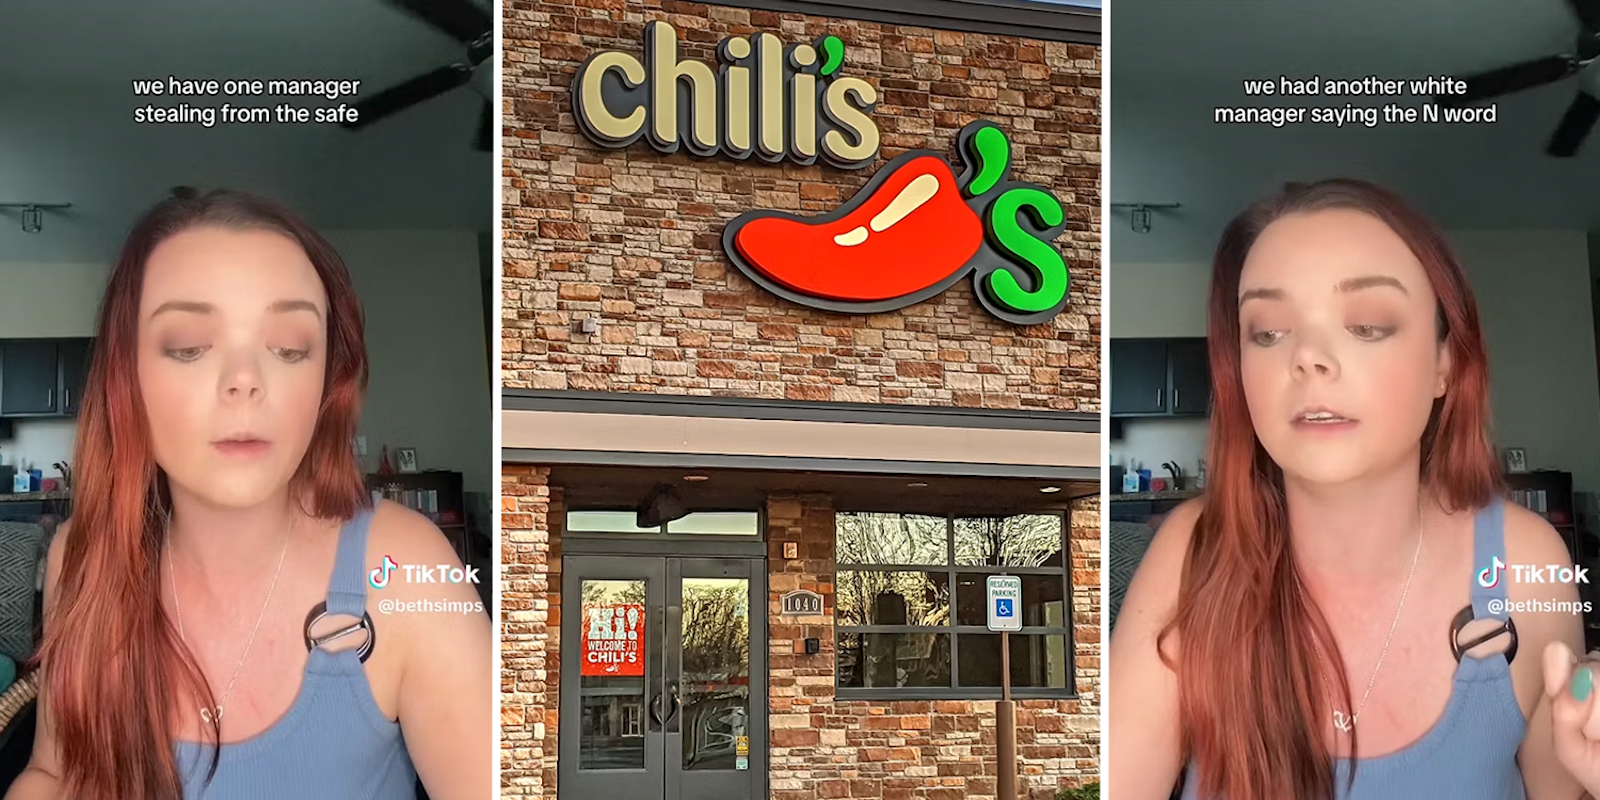 chillis n word manager